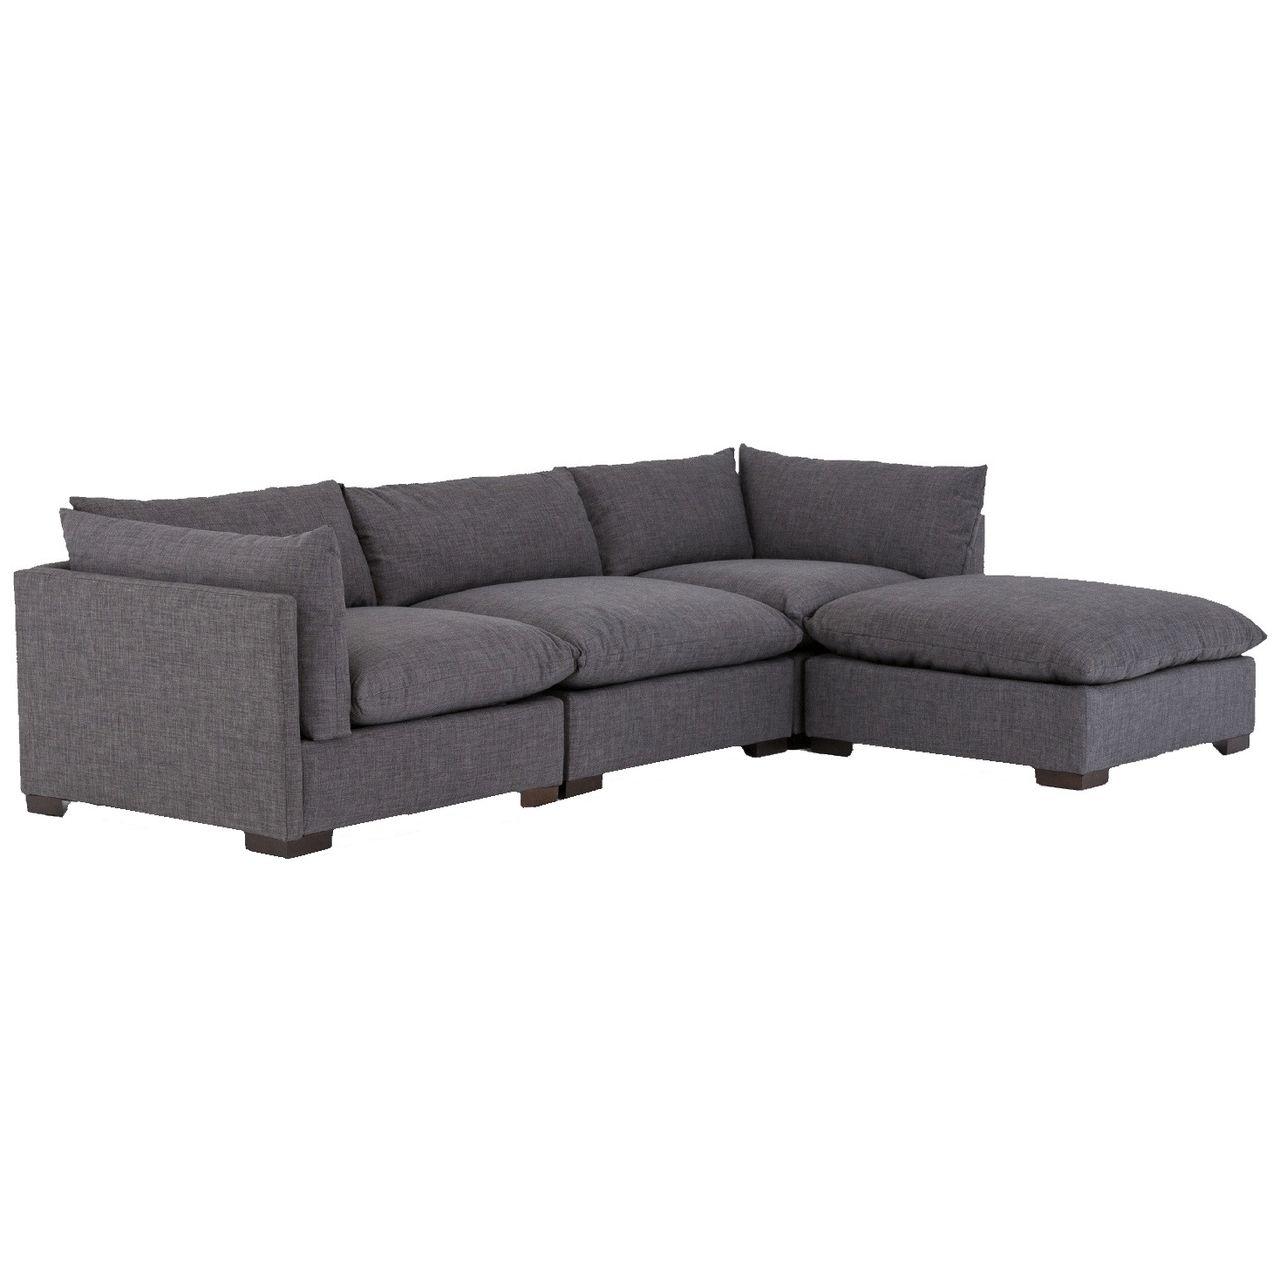 Westworld Modern Gray 4 Piece Modular Lounge Sectional For Benton 4 Piece Sectionals (View 8 of 15)